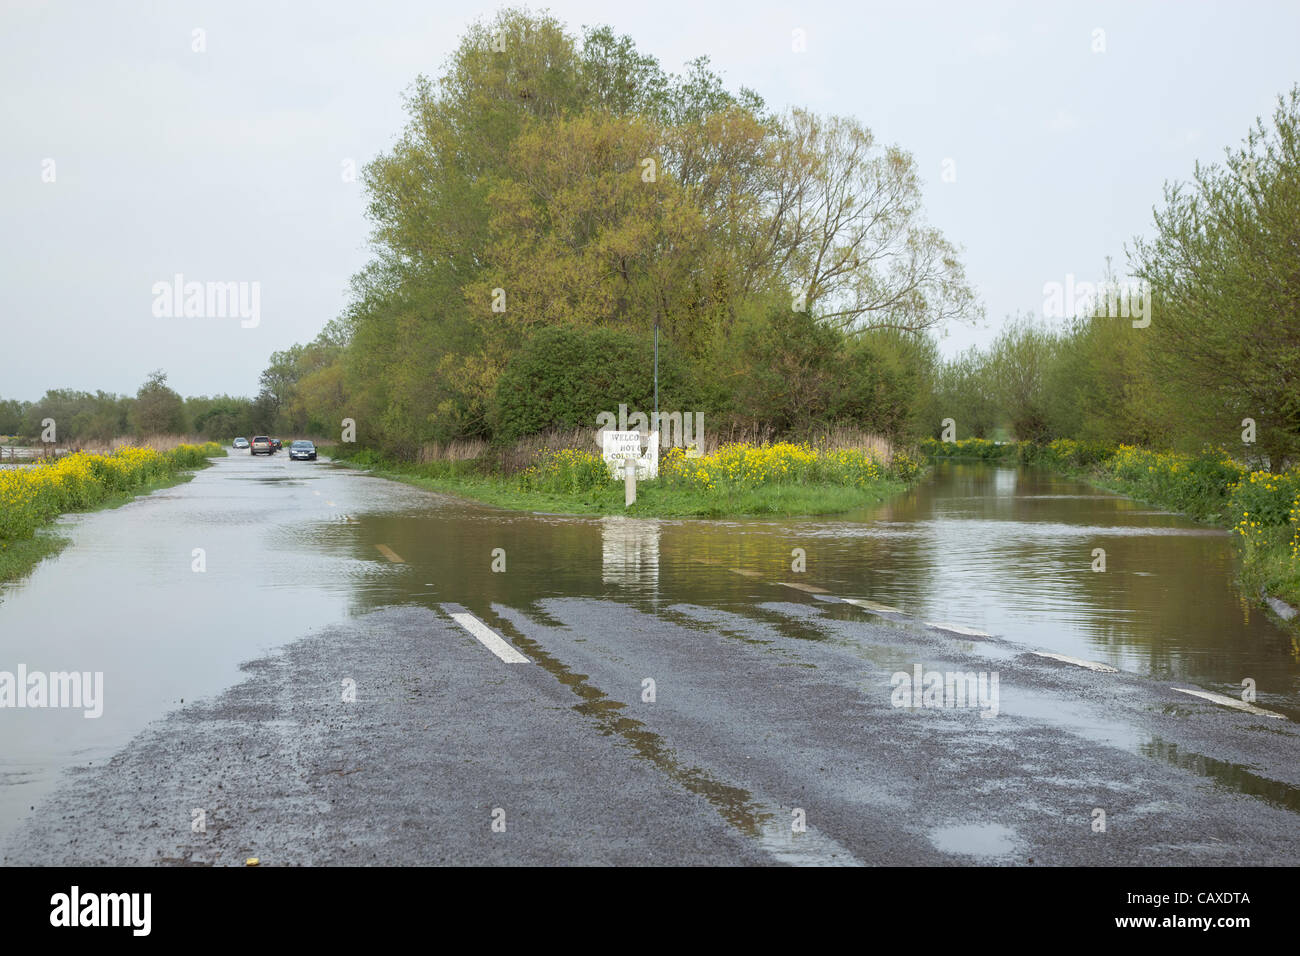 Cars pass through flood water on the main A361 from Taunton to Glastonbury near Athelney on 2 May 2012 . The road and layby were closed briefly as it became impassable due to the continuous rain which has caused widespread flooding across the Somerset Levels despite the official drought declaration. Stock Photo